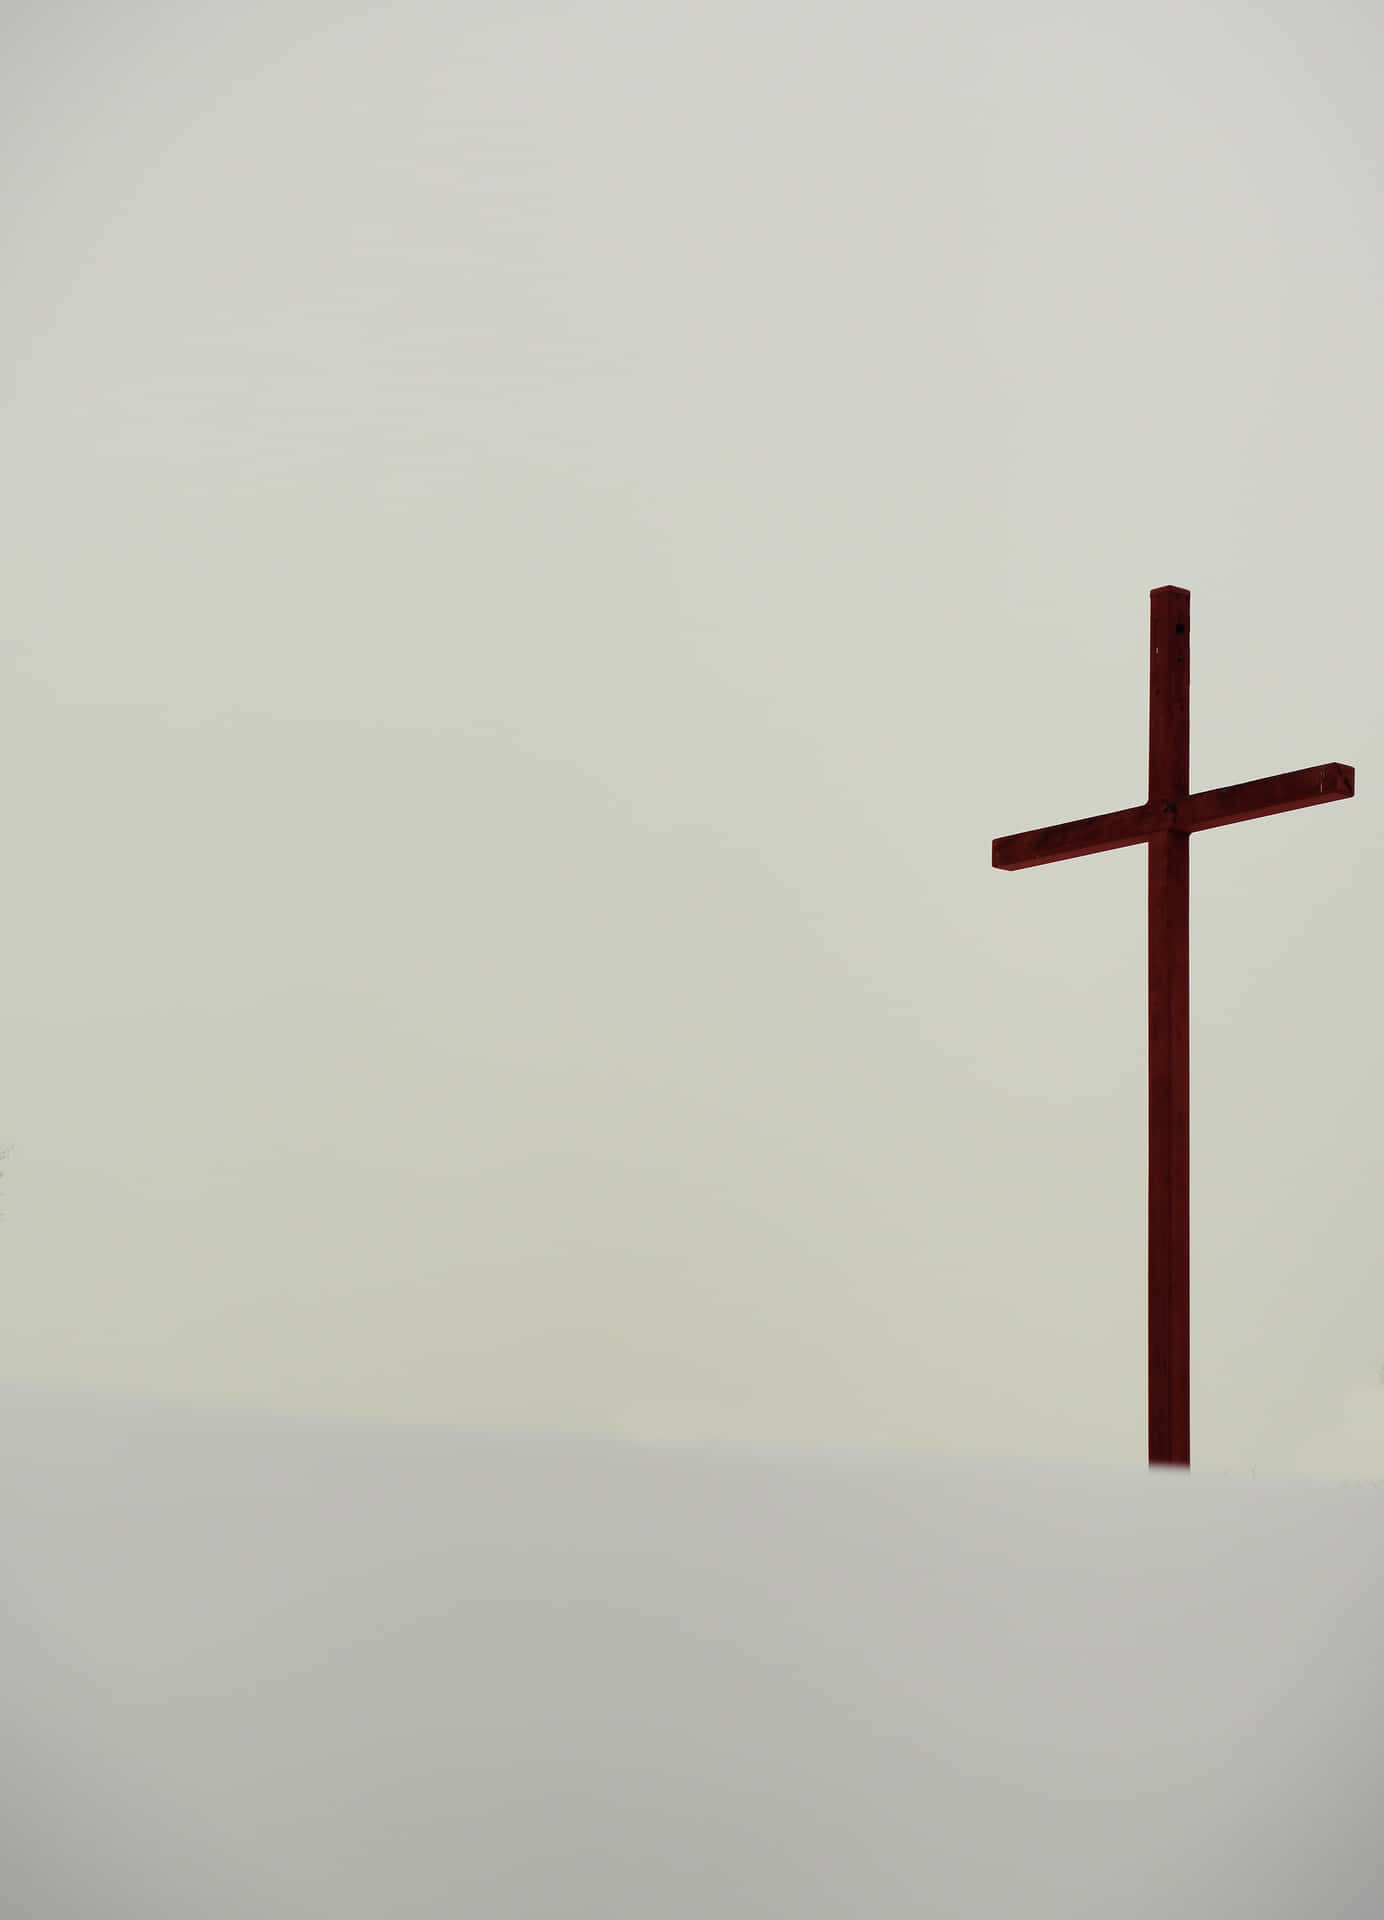 A Unique Perspective of the Peaceful Aesthetic Cross Wallpaper